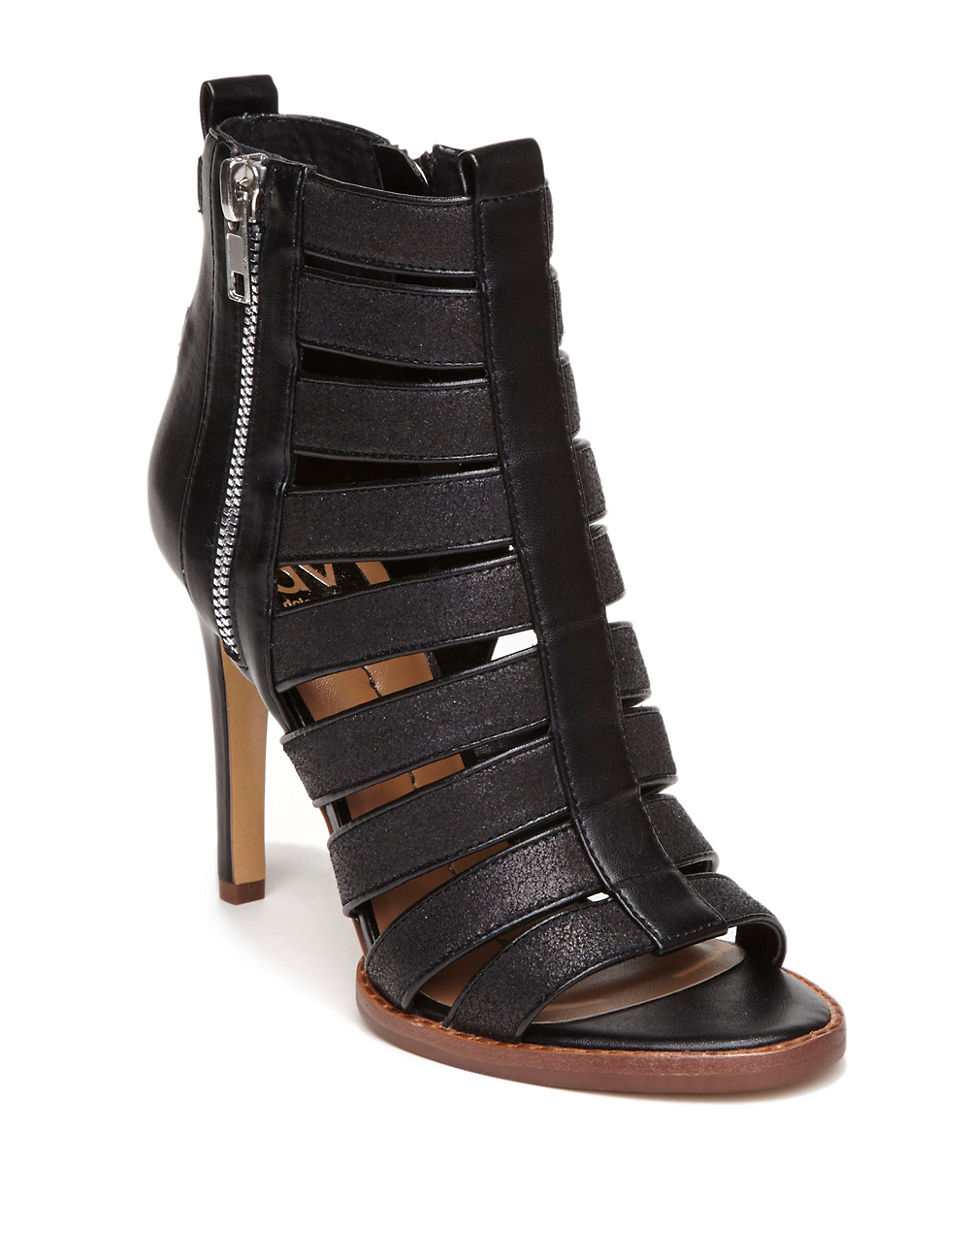 Dolce Vita Shani Leather Open-Toe Gladiator Sandals in Black | Lyst